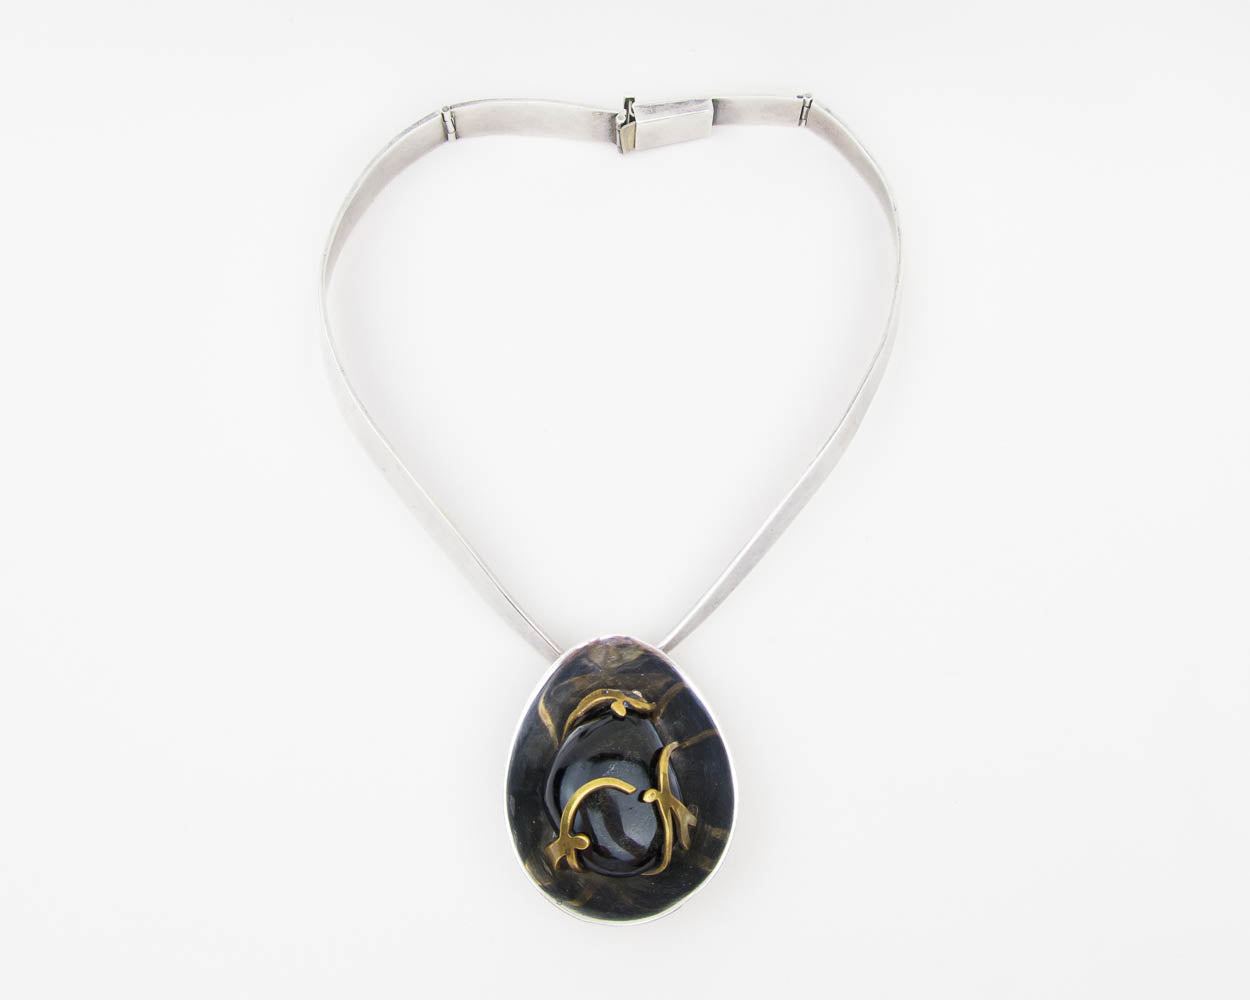 Taxco Mexico Mid-Century Sterling Collar with Obsidian Drop